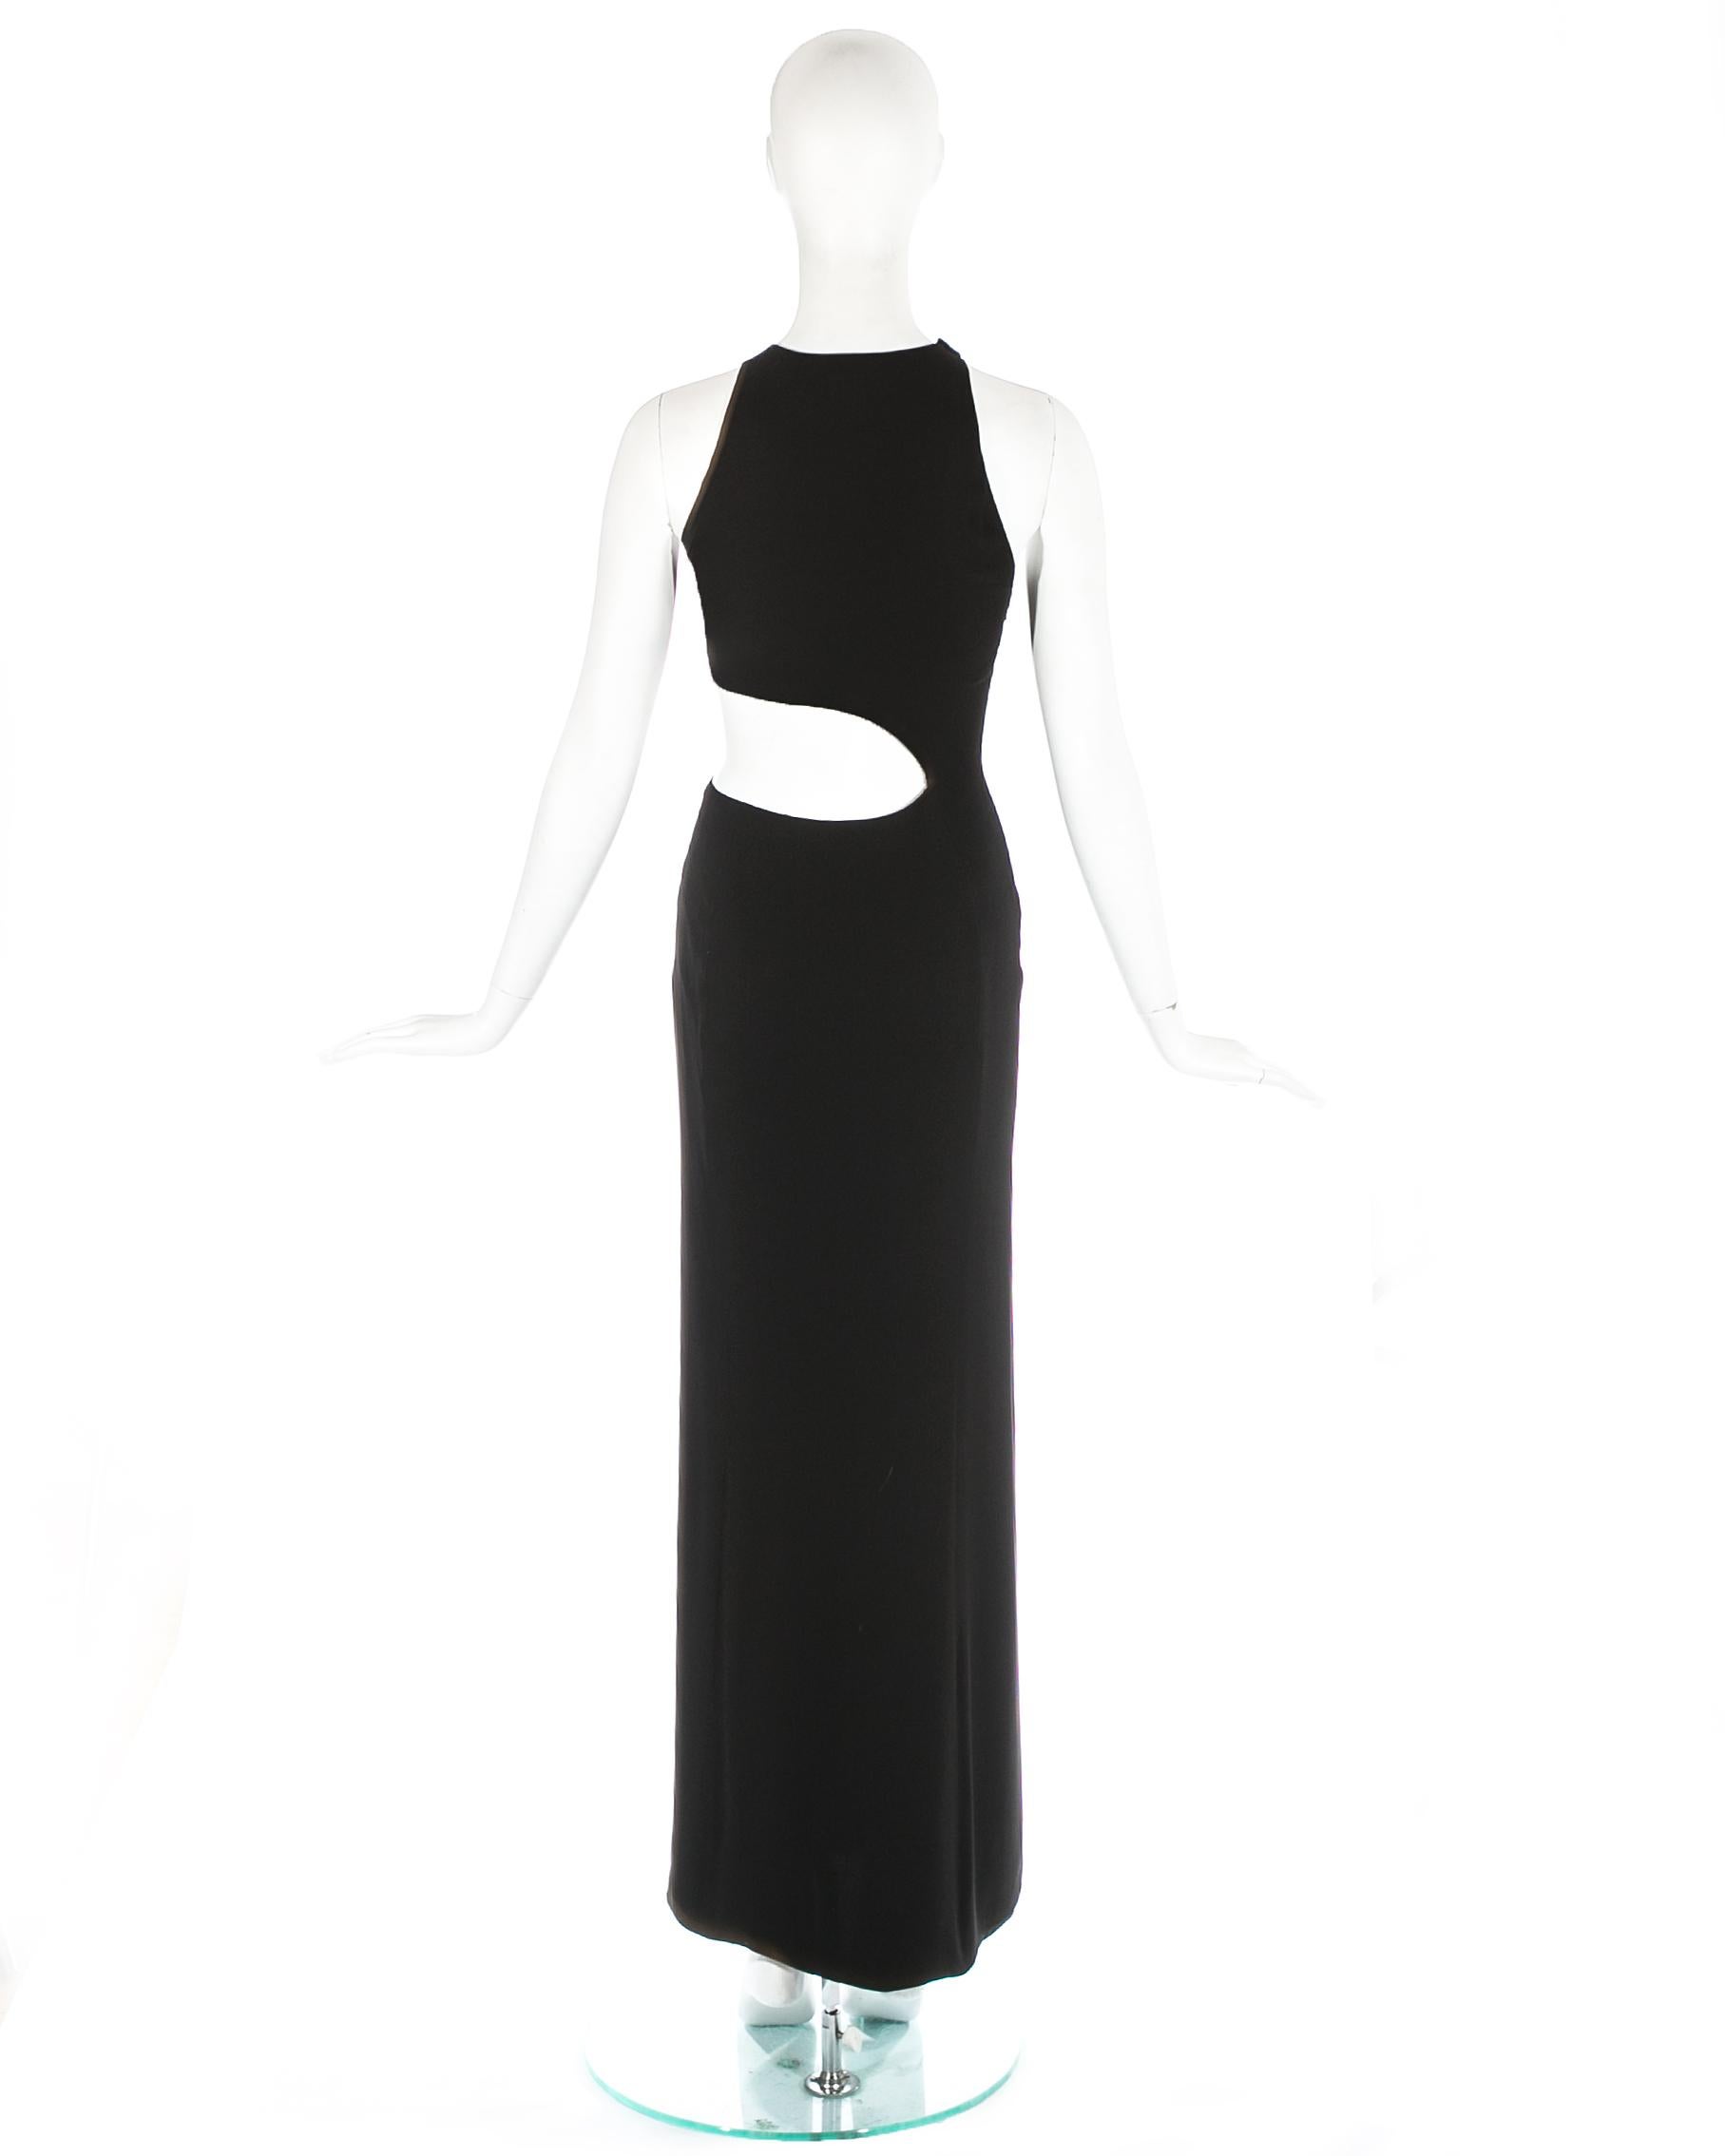 Gianni Versace black silk evening dress with cut out and leg slit, ss 1998 For Sale 1